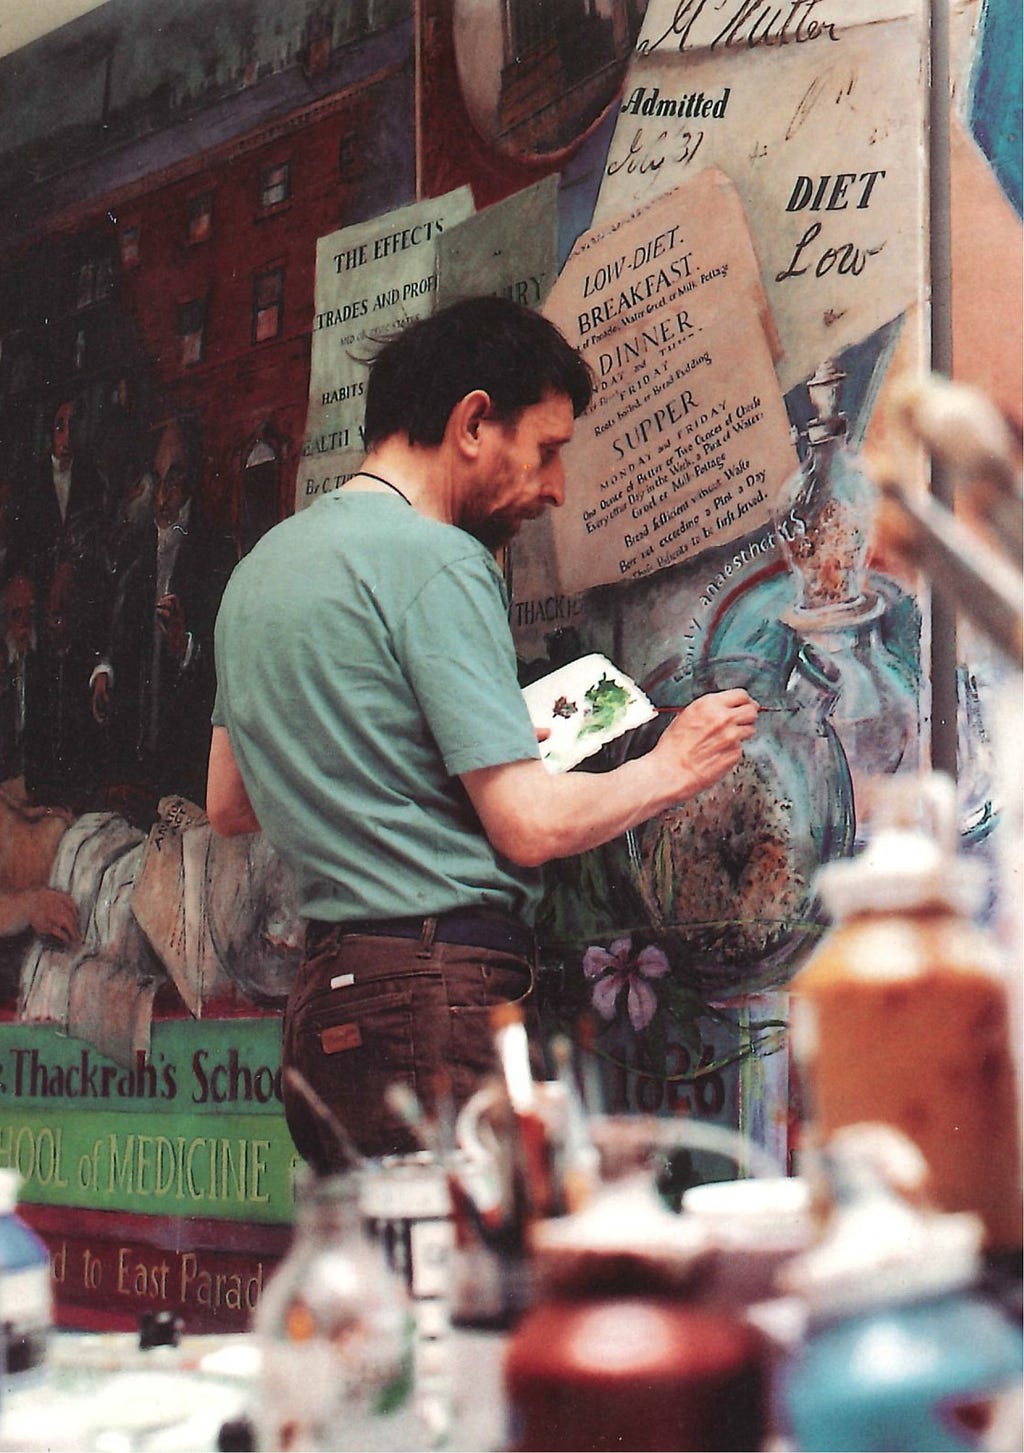 An artist painting a mural on a wall